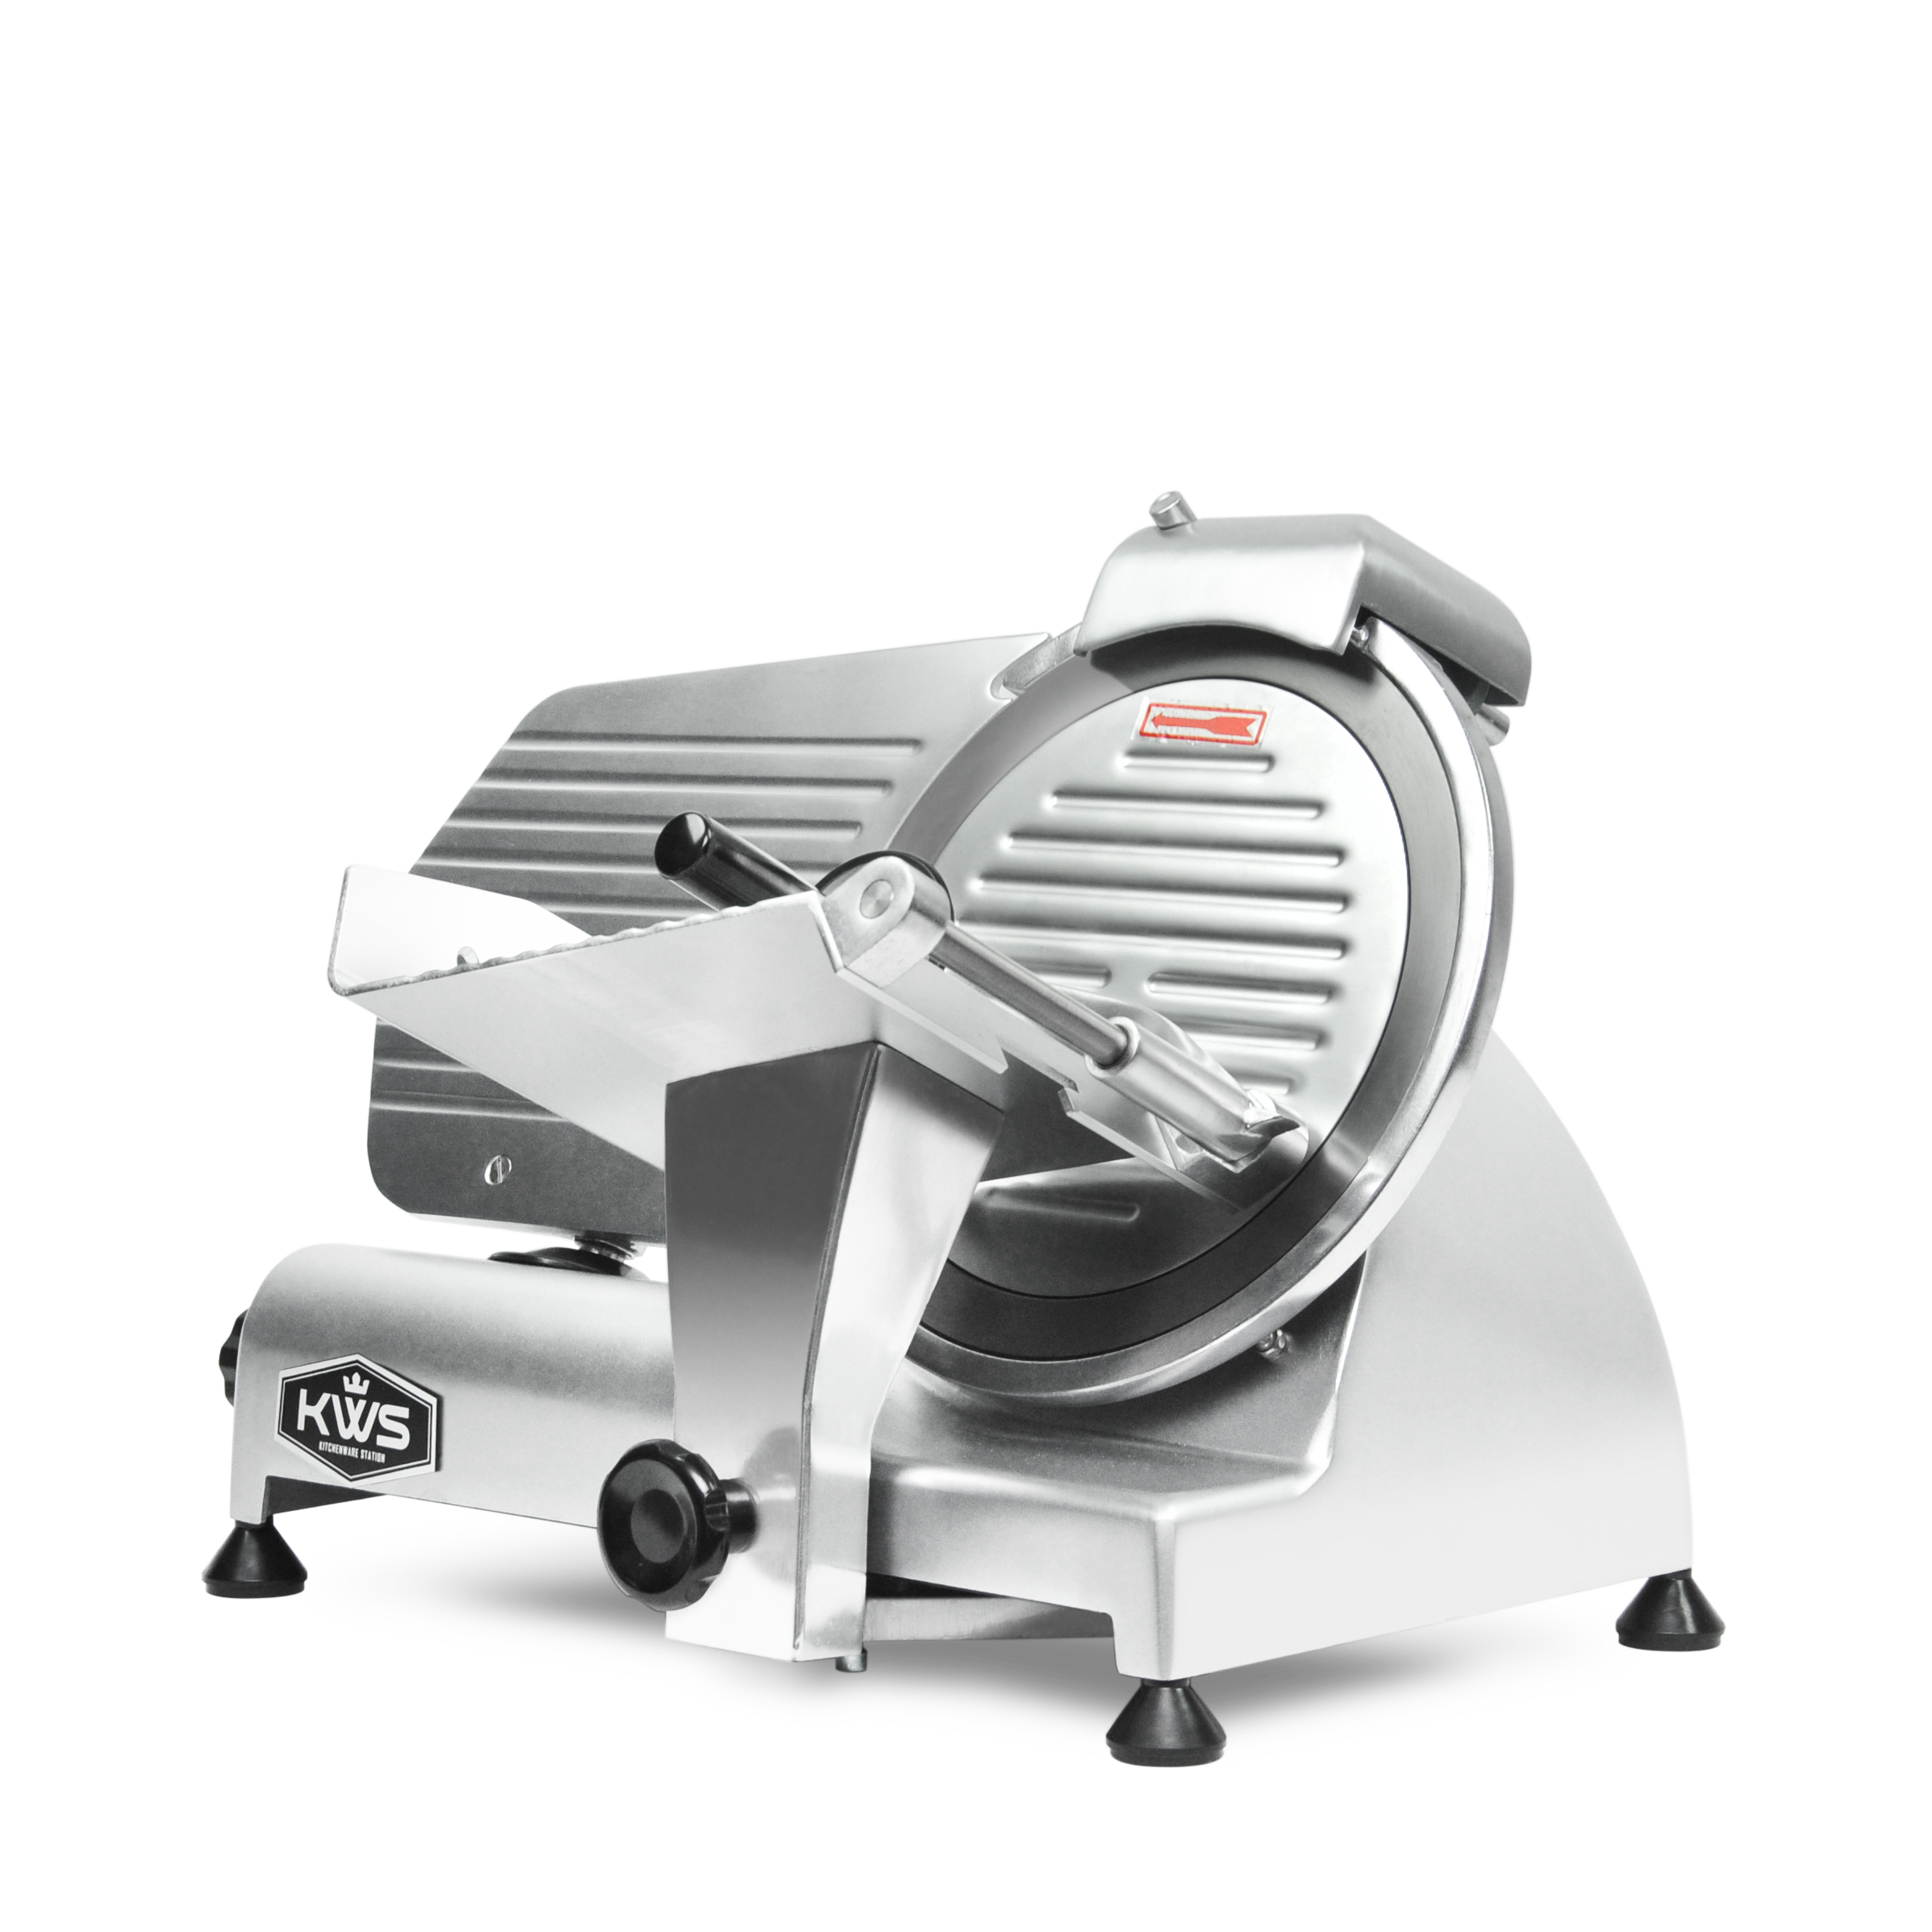 The 5 Best Meat Slicers, According to Our Research